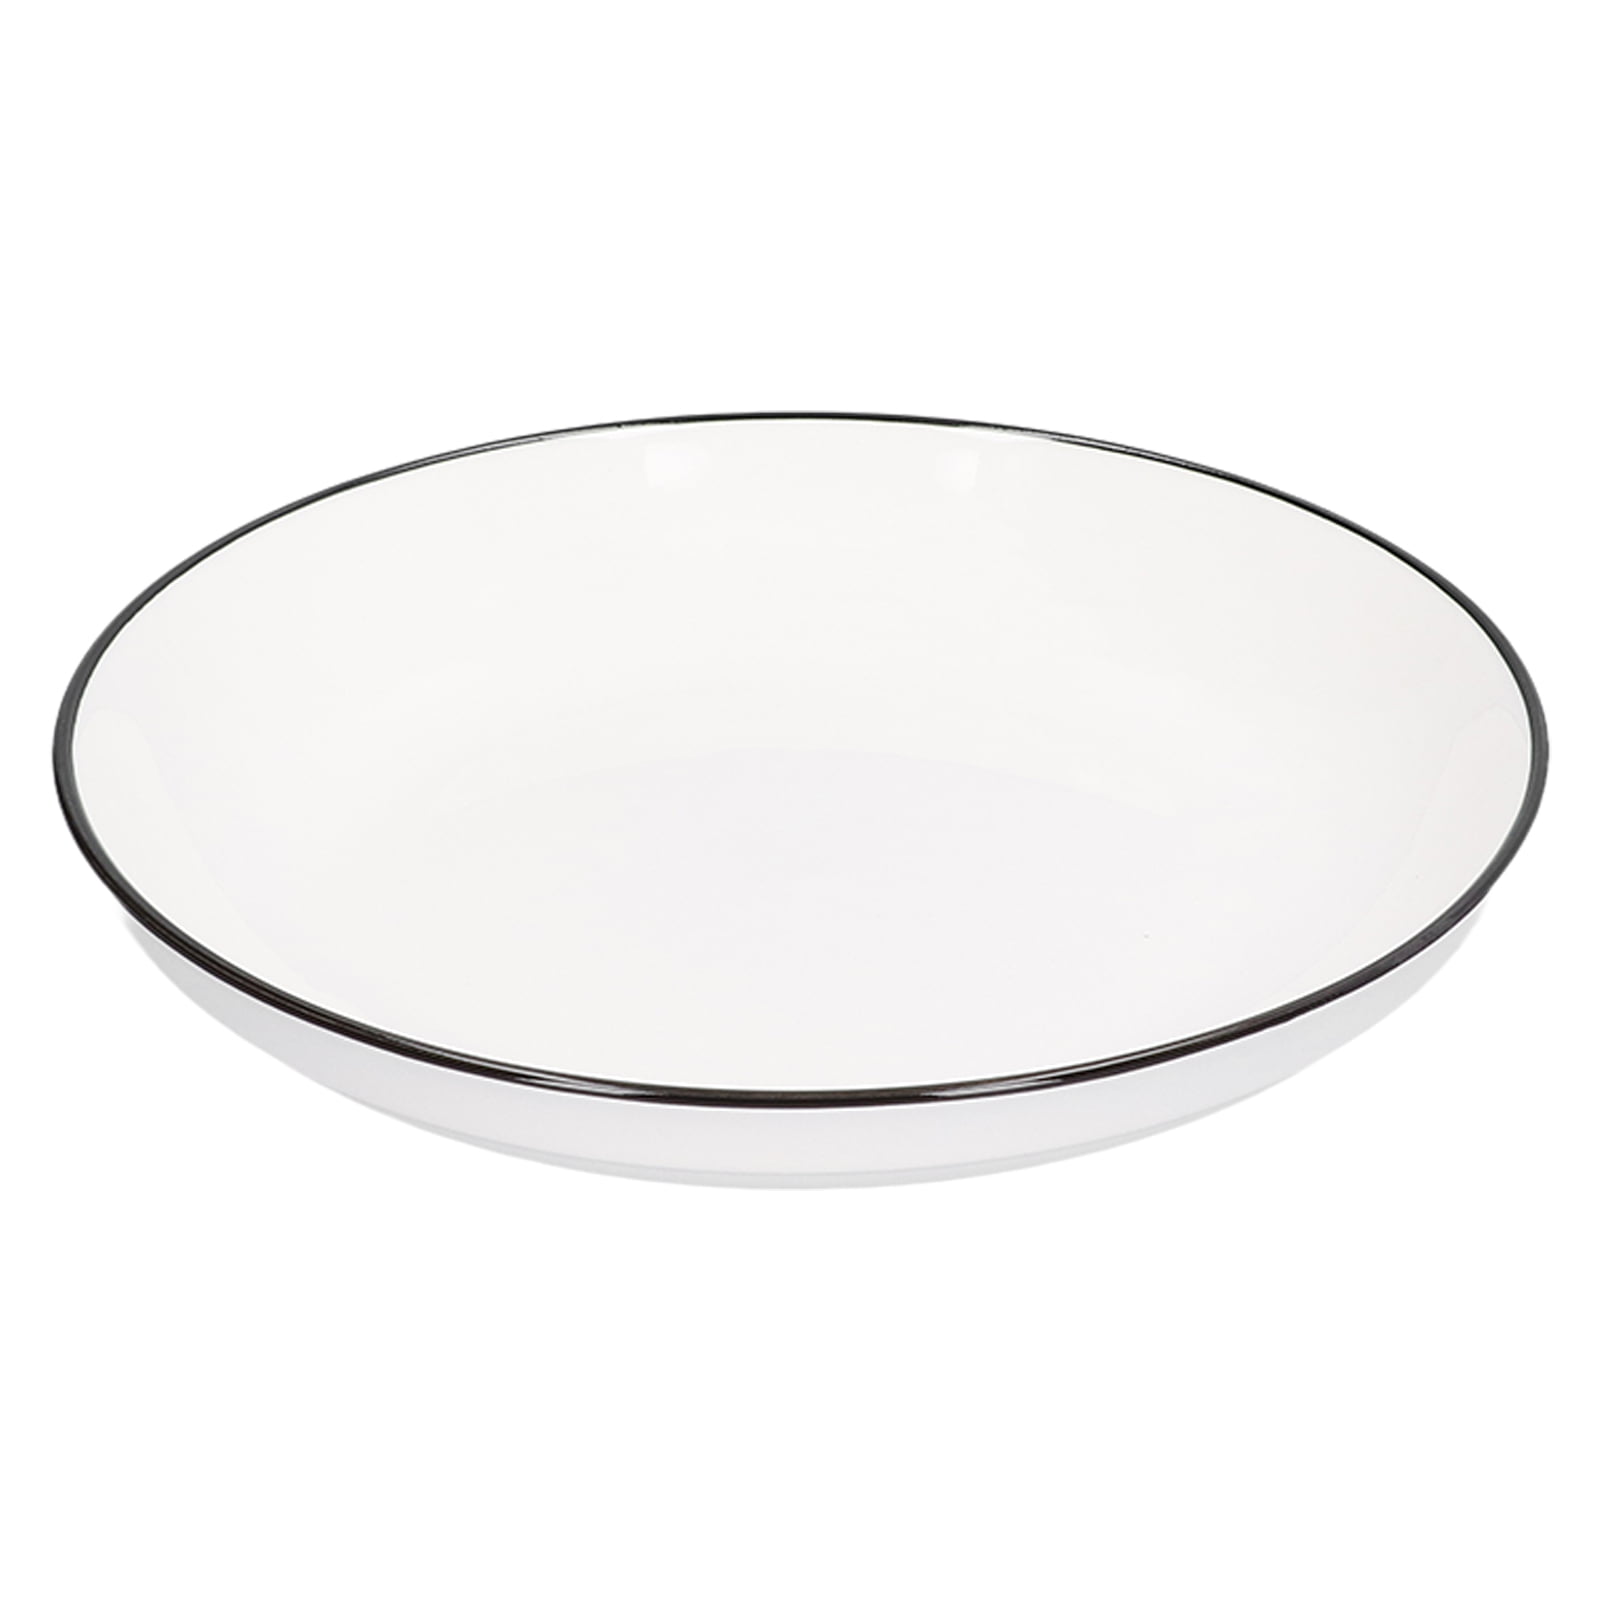 Plate, 7-1/4, round, dishwasher/oven/microwave safe, fully